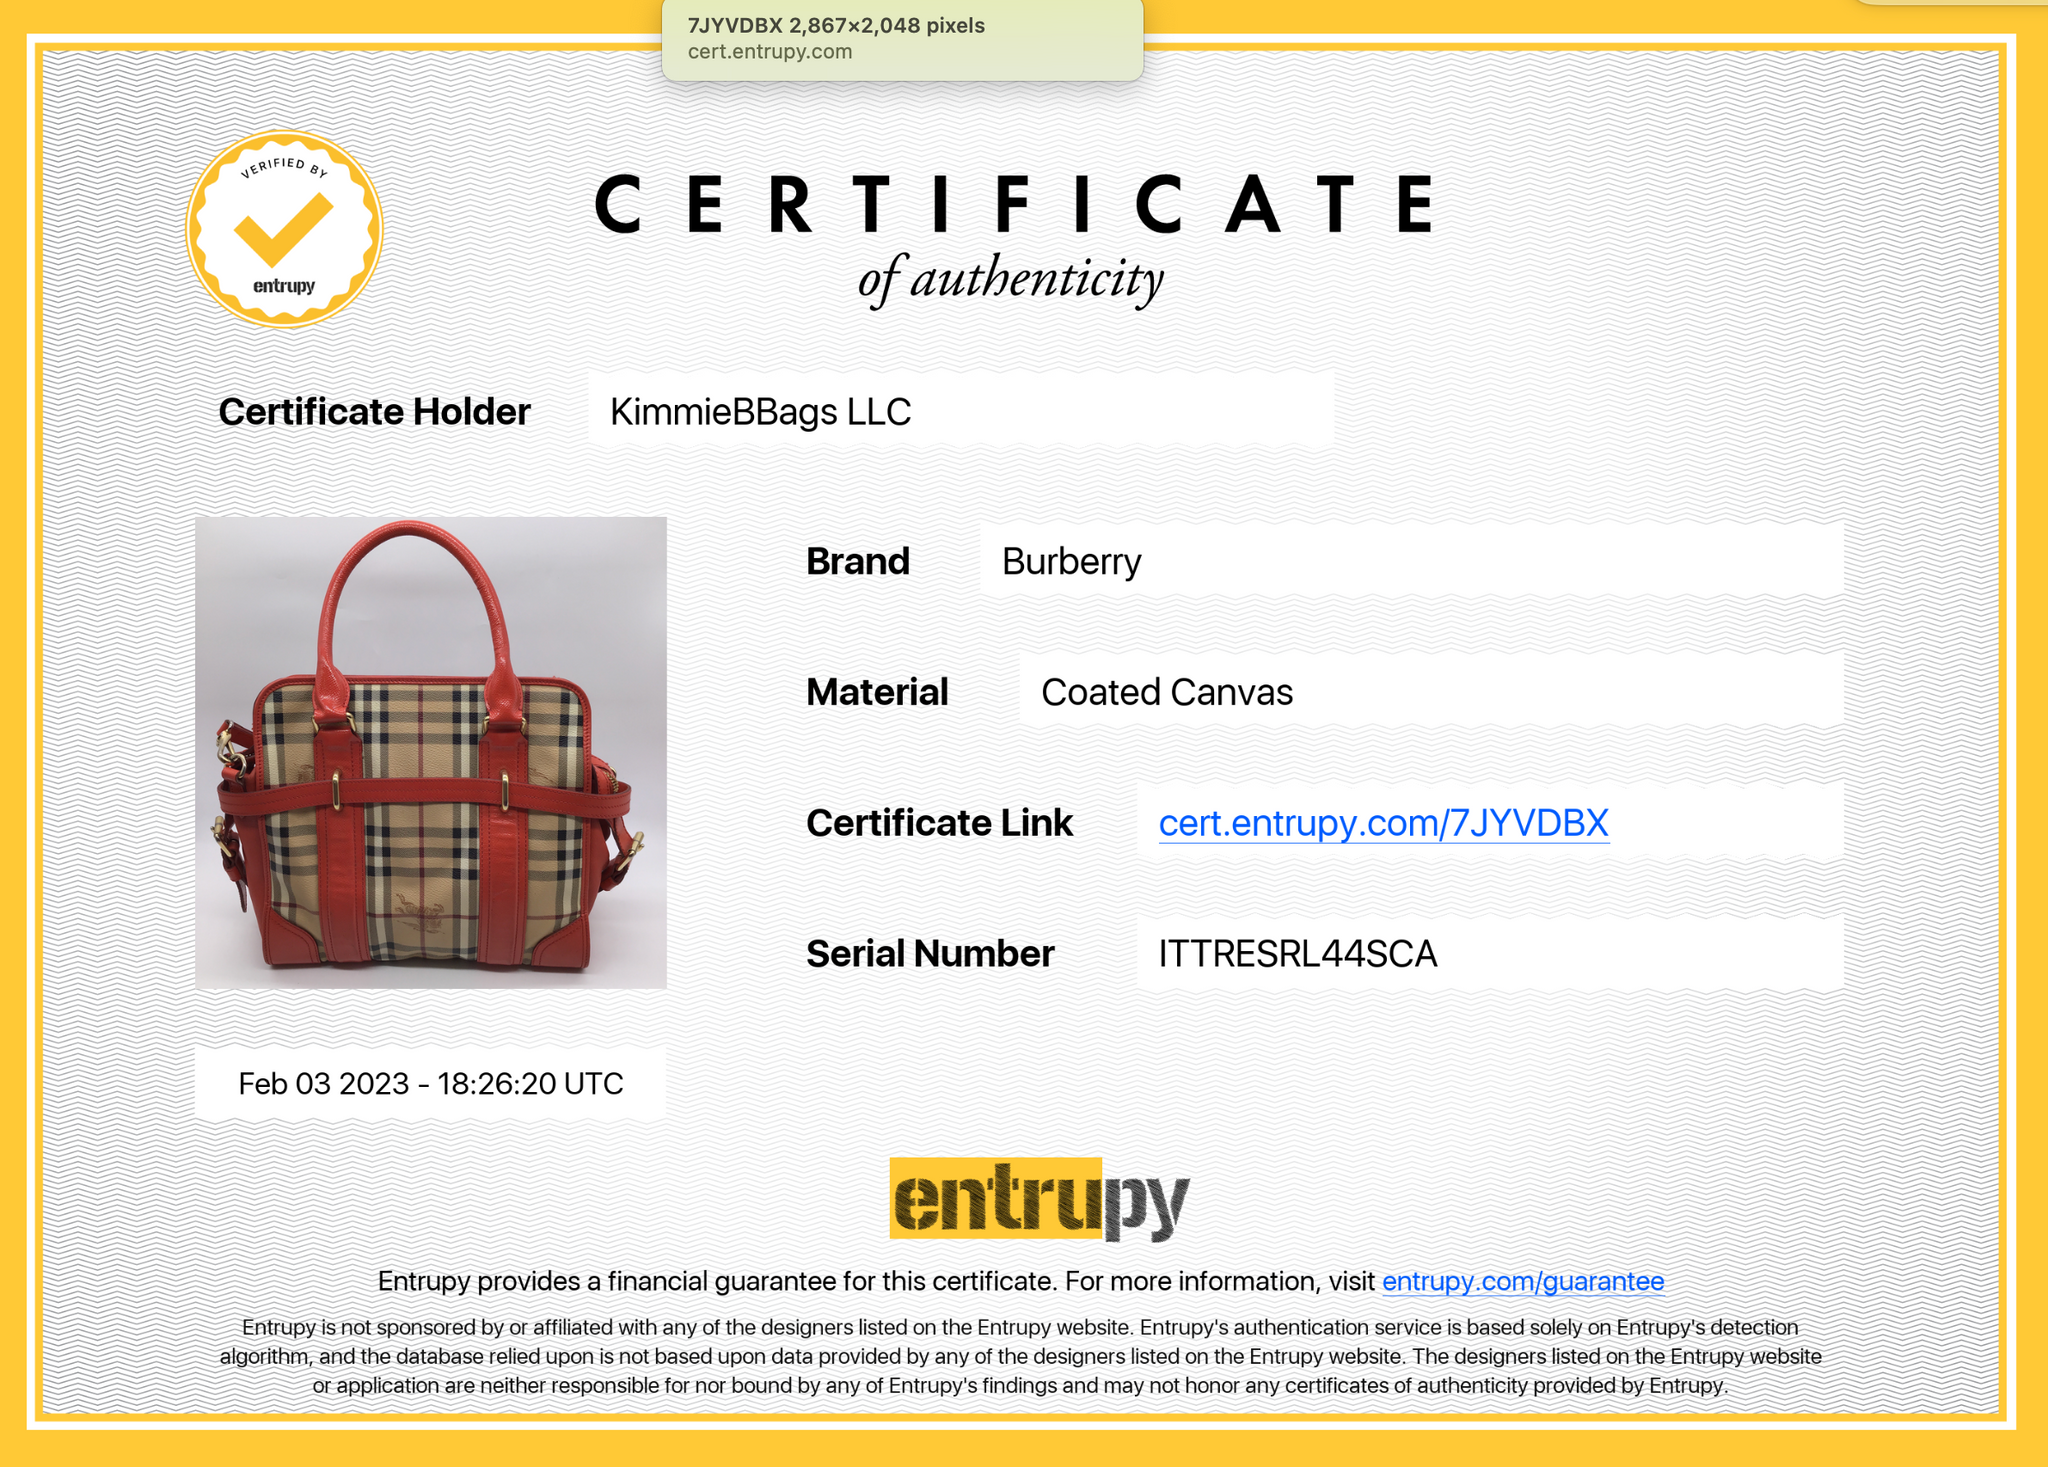 BURBERRY Leather-trimmed checked coated-canvas shoulder bag in 2023